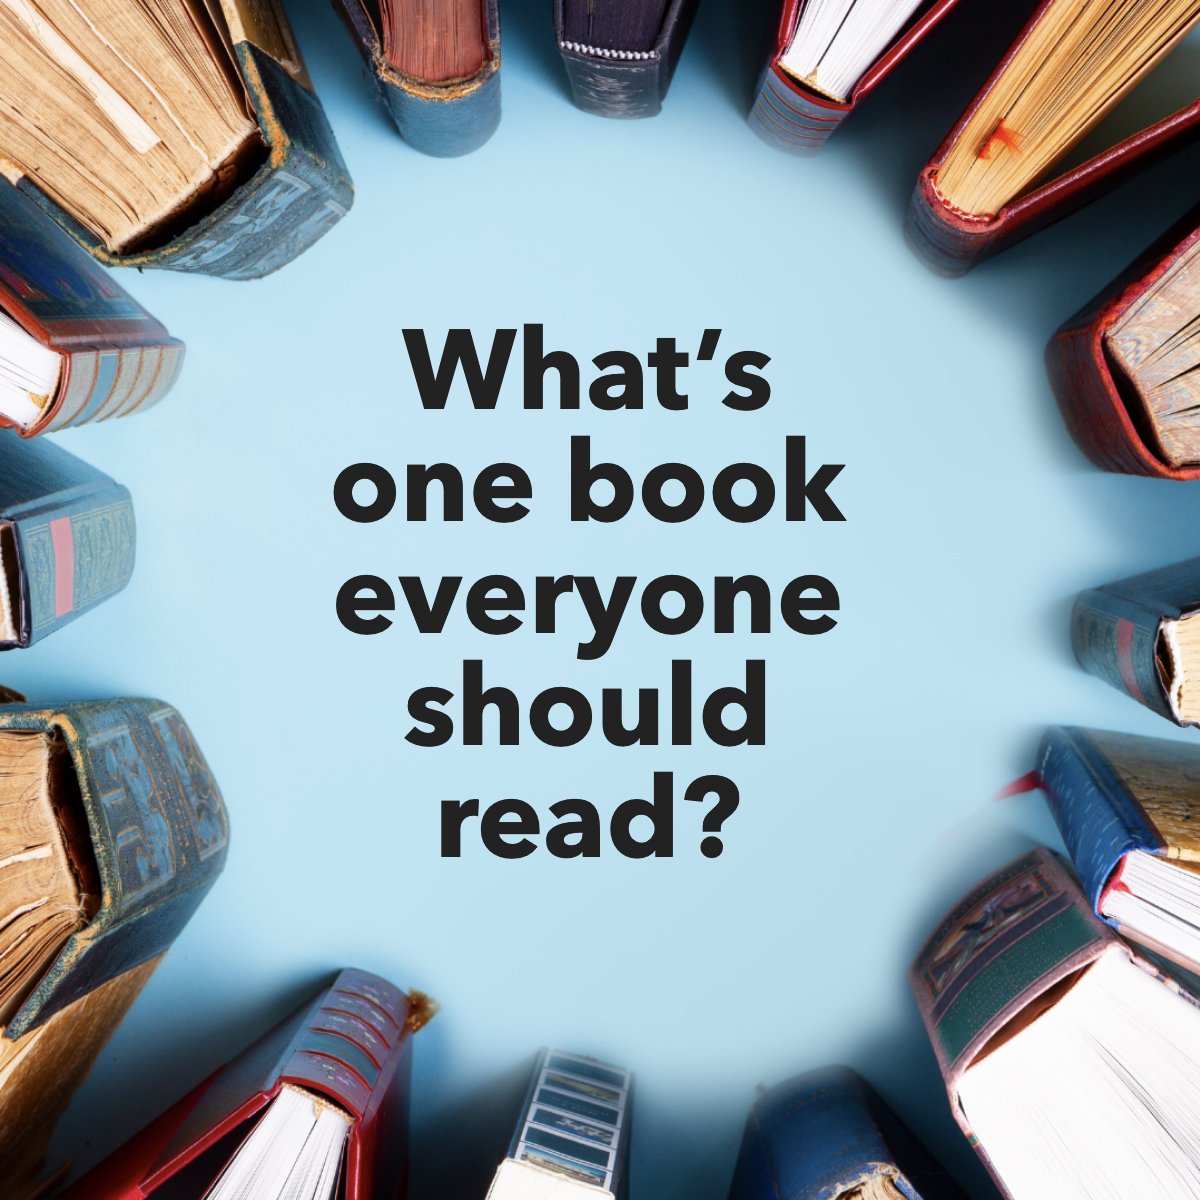 Do you have any favorite books?

#questionoftheday     #booksarelife     #booksofinsta     #books📚
#realestate #realtor #southcarolina #homebuyer #land #homeowner #homeimprovement #lakemarion #summerville #lakemoultrie #sc #palmettostate #realestateagent #homeforsale